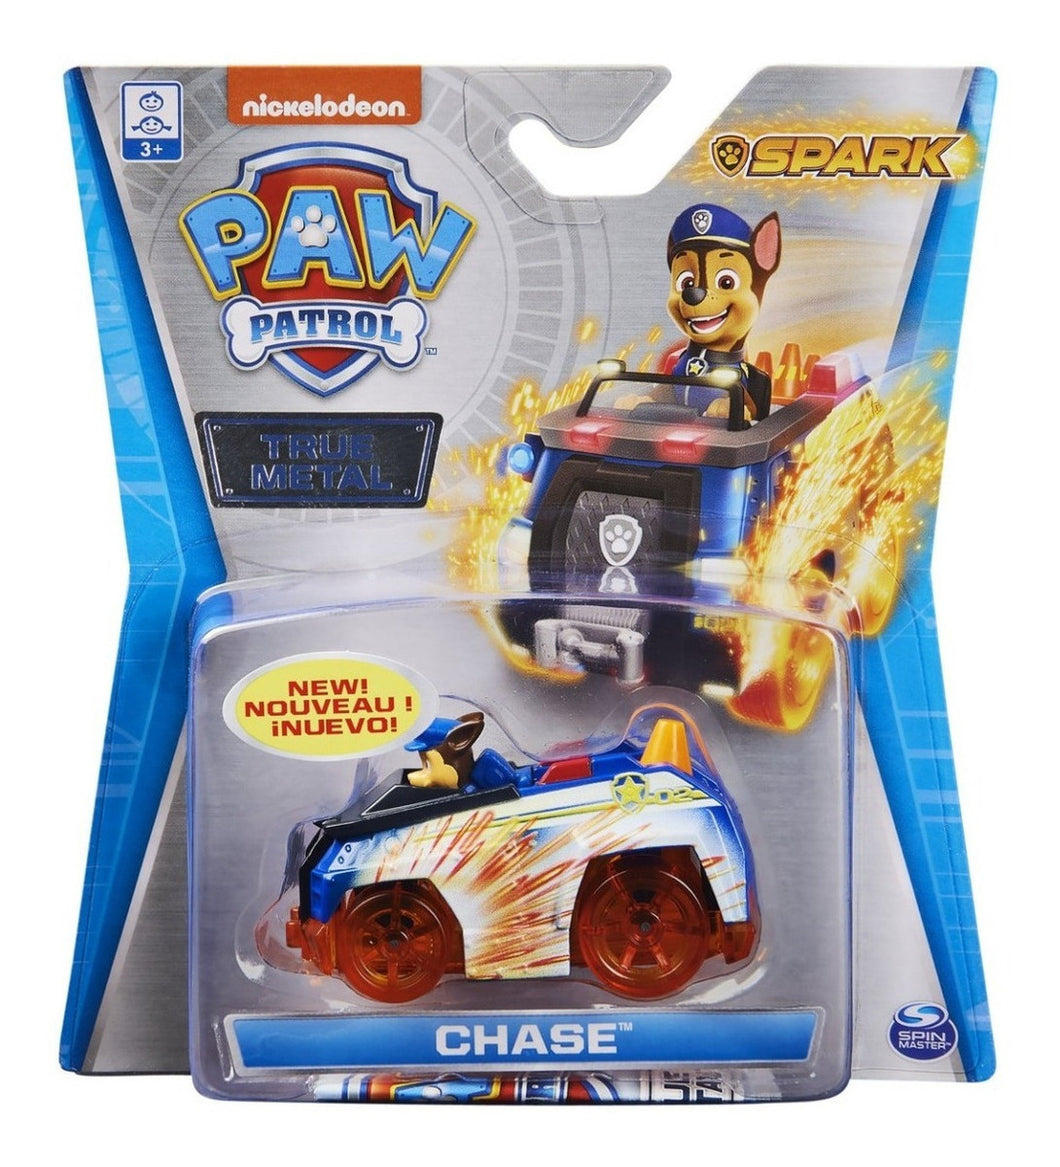 Paw Patrol True Metal Vehiculo Colección Spin Master Chase-Spark - PriceOnLine